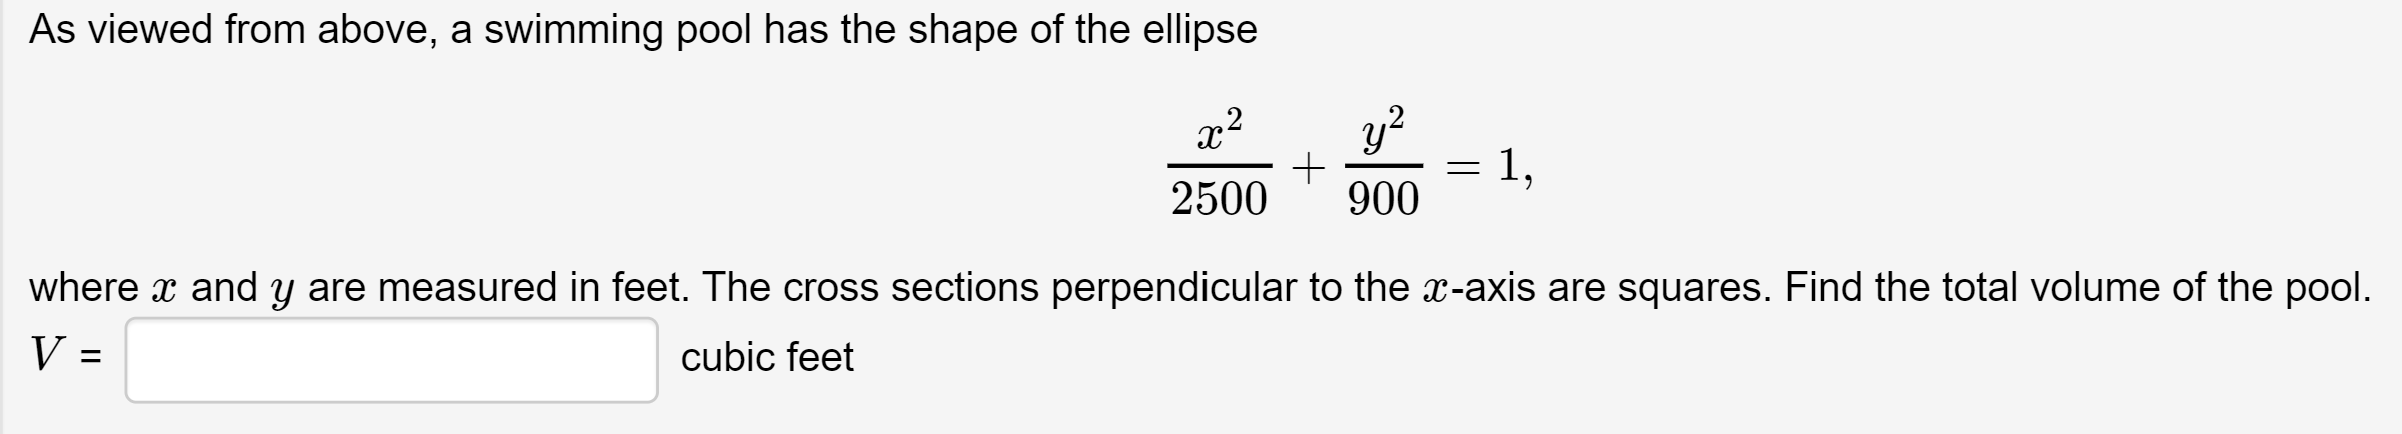 As viewed from above, a swimming pool has the shape of the ellipse
y?
1,
900
2500
where x and y are measured in feet. The cross sections perpendicular to the x-axis are squares. Find the total volume of the pool.
V =
cubic feet
